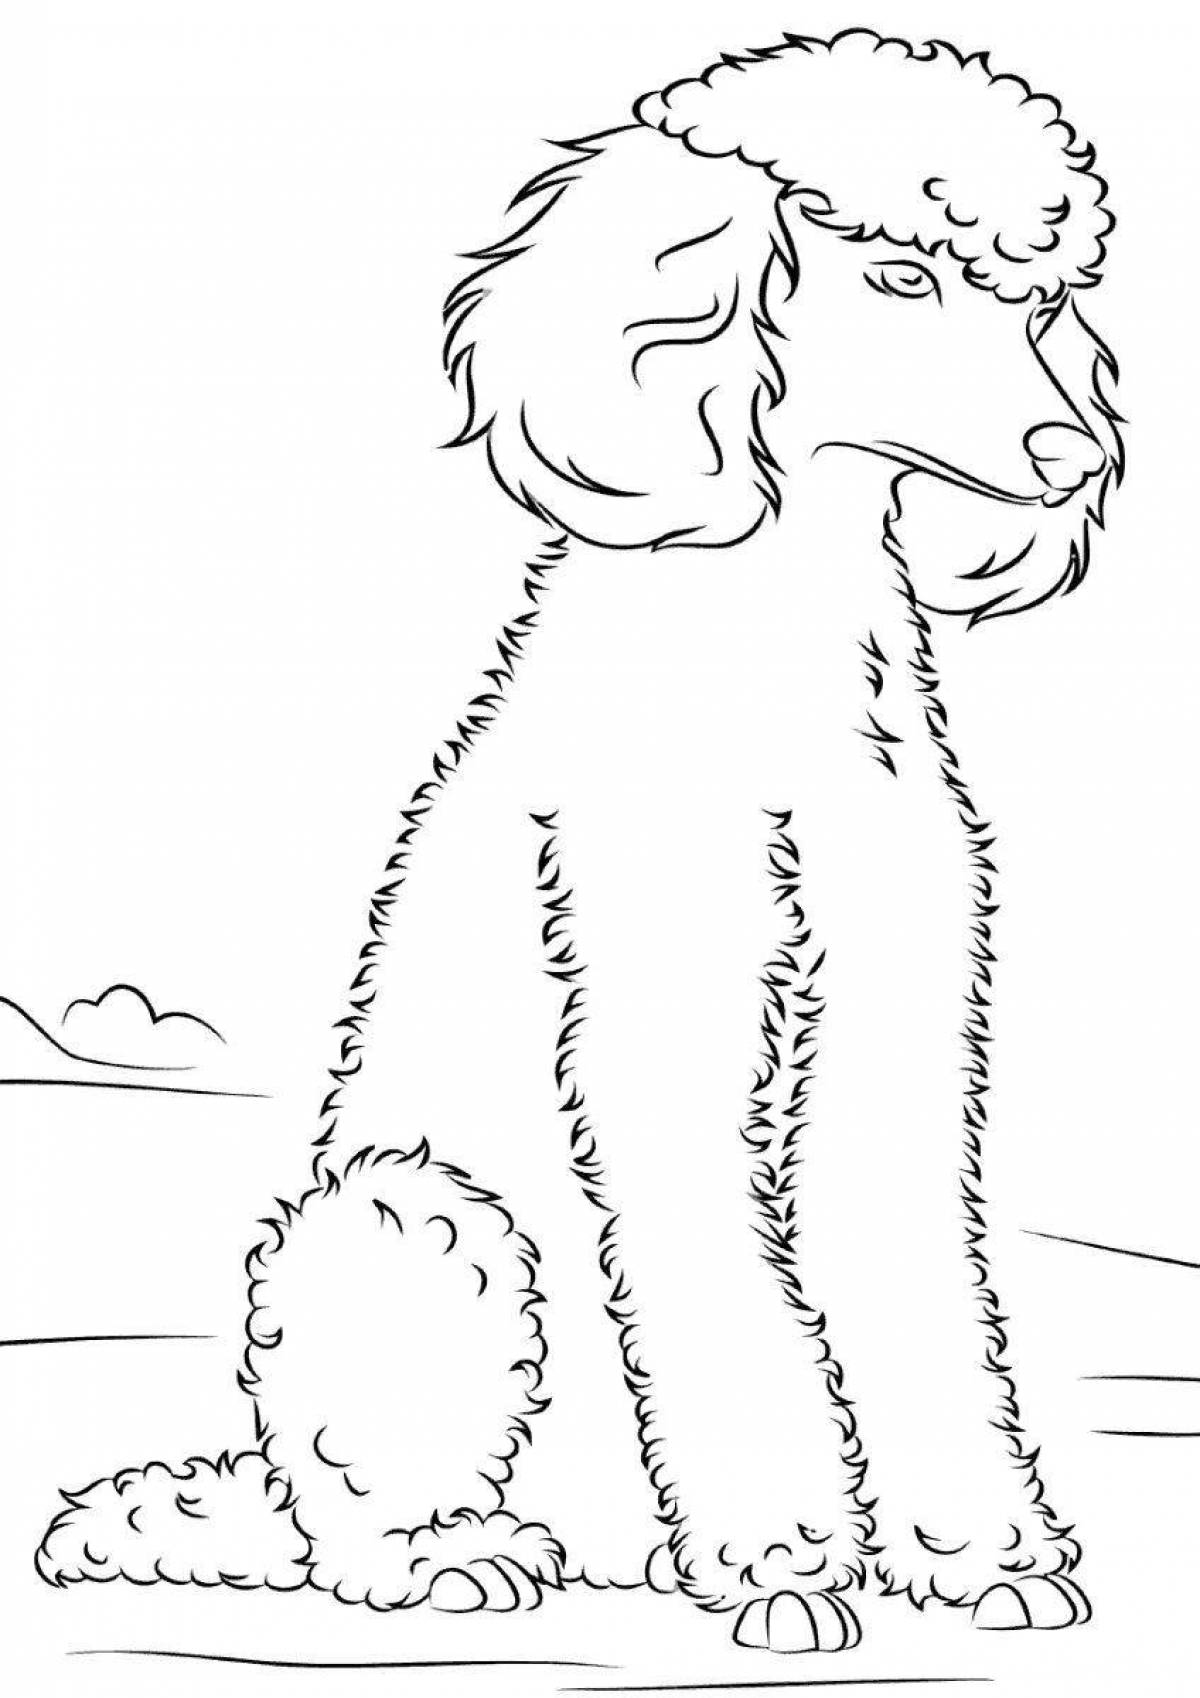 A fun poodle coloring book for kids